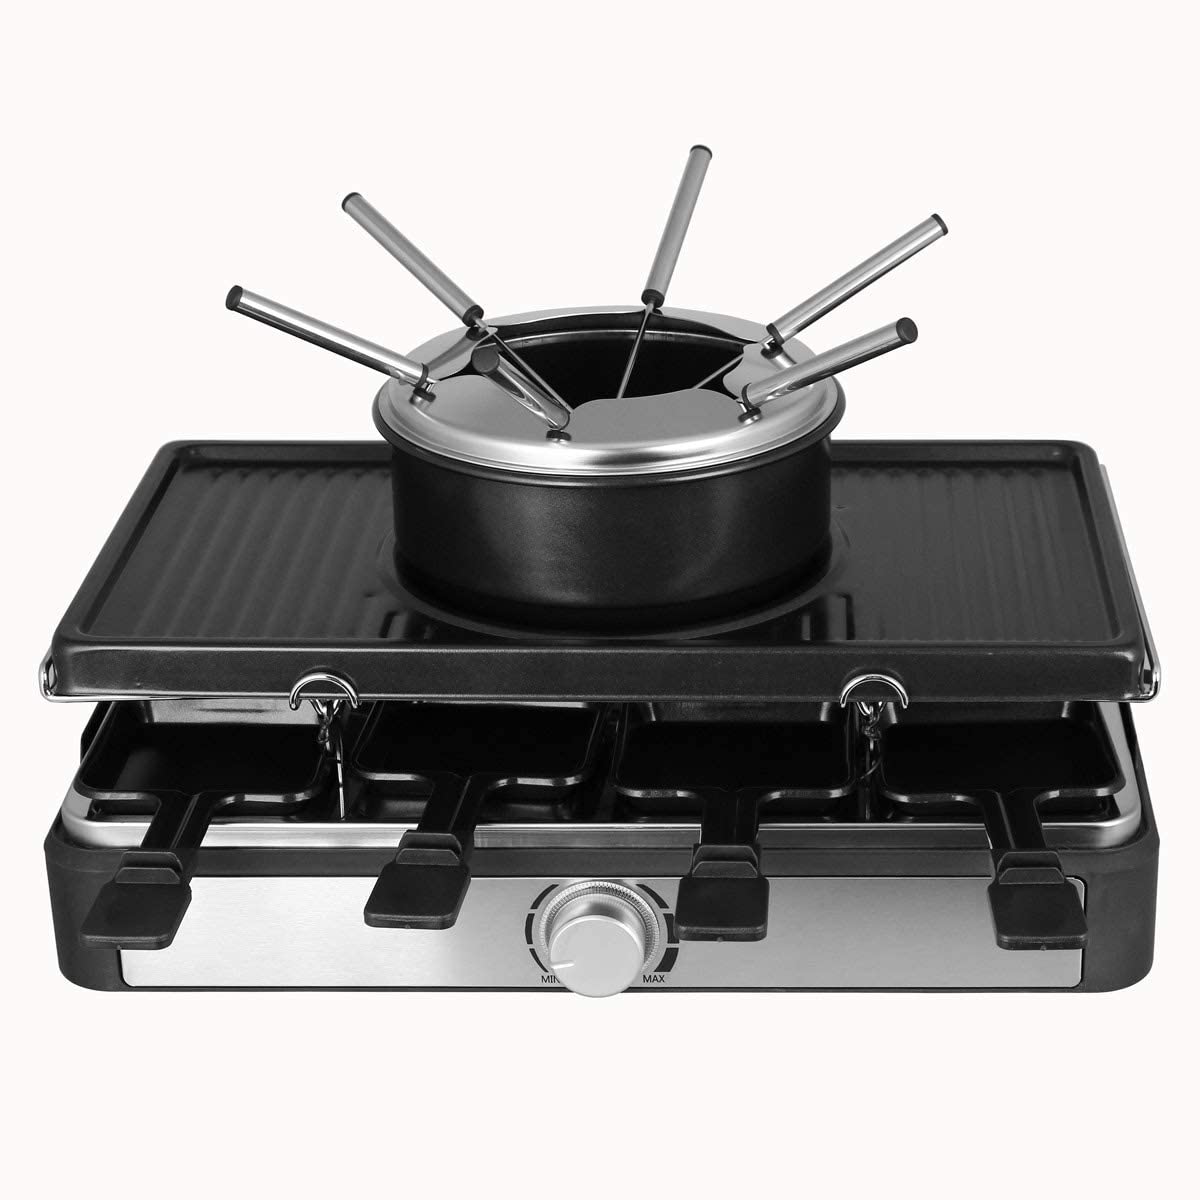 Emerio Party Fun for Up to 8 People with this 3-in-1 Combination of Raclette Grill and Cheese Fondue for A Variety of Barbecue Pleasure, Including 8 Pans, 8 Spatulas, 6 Fondue Forks, BPA Free